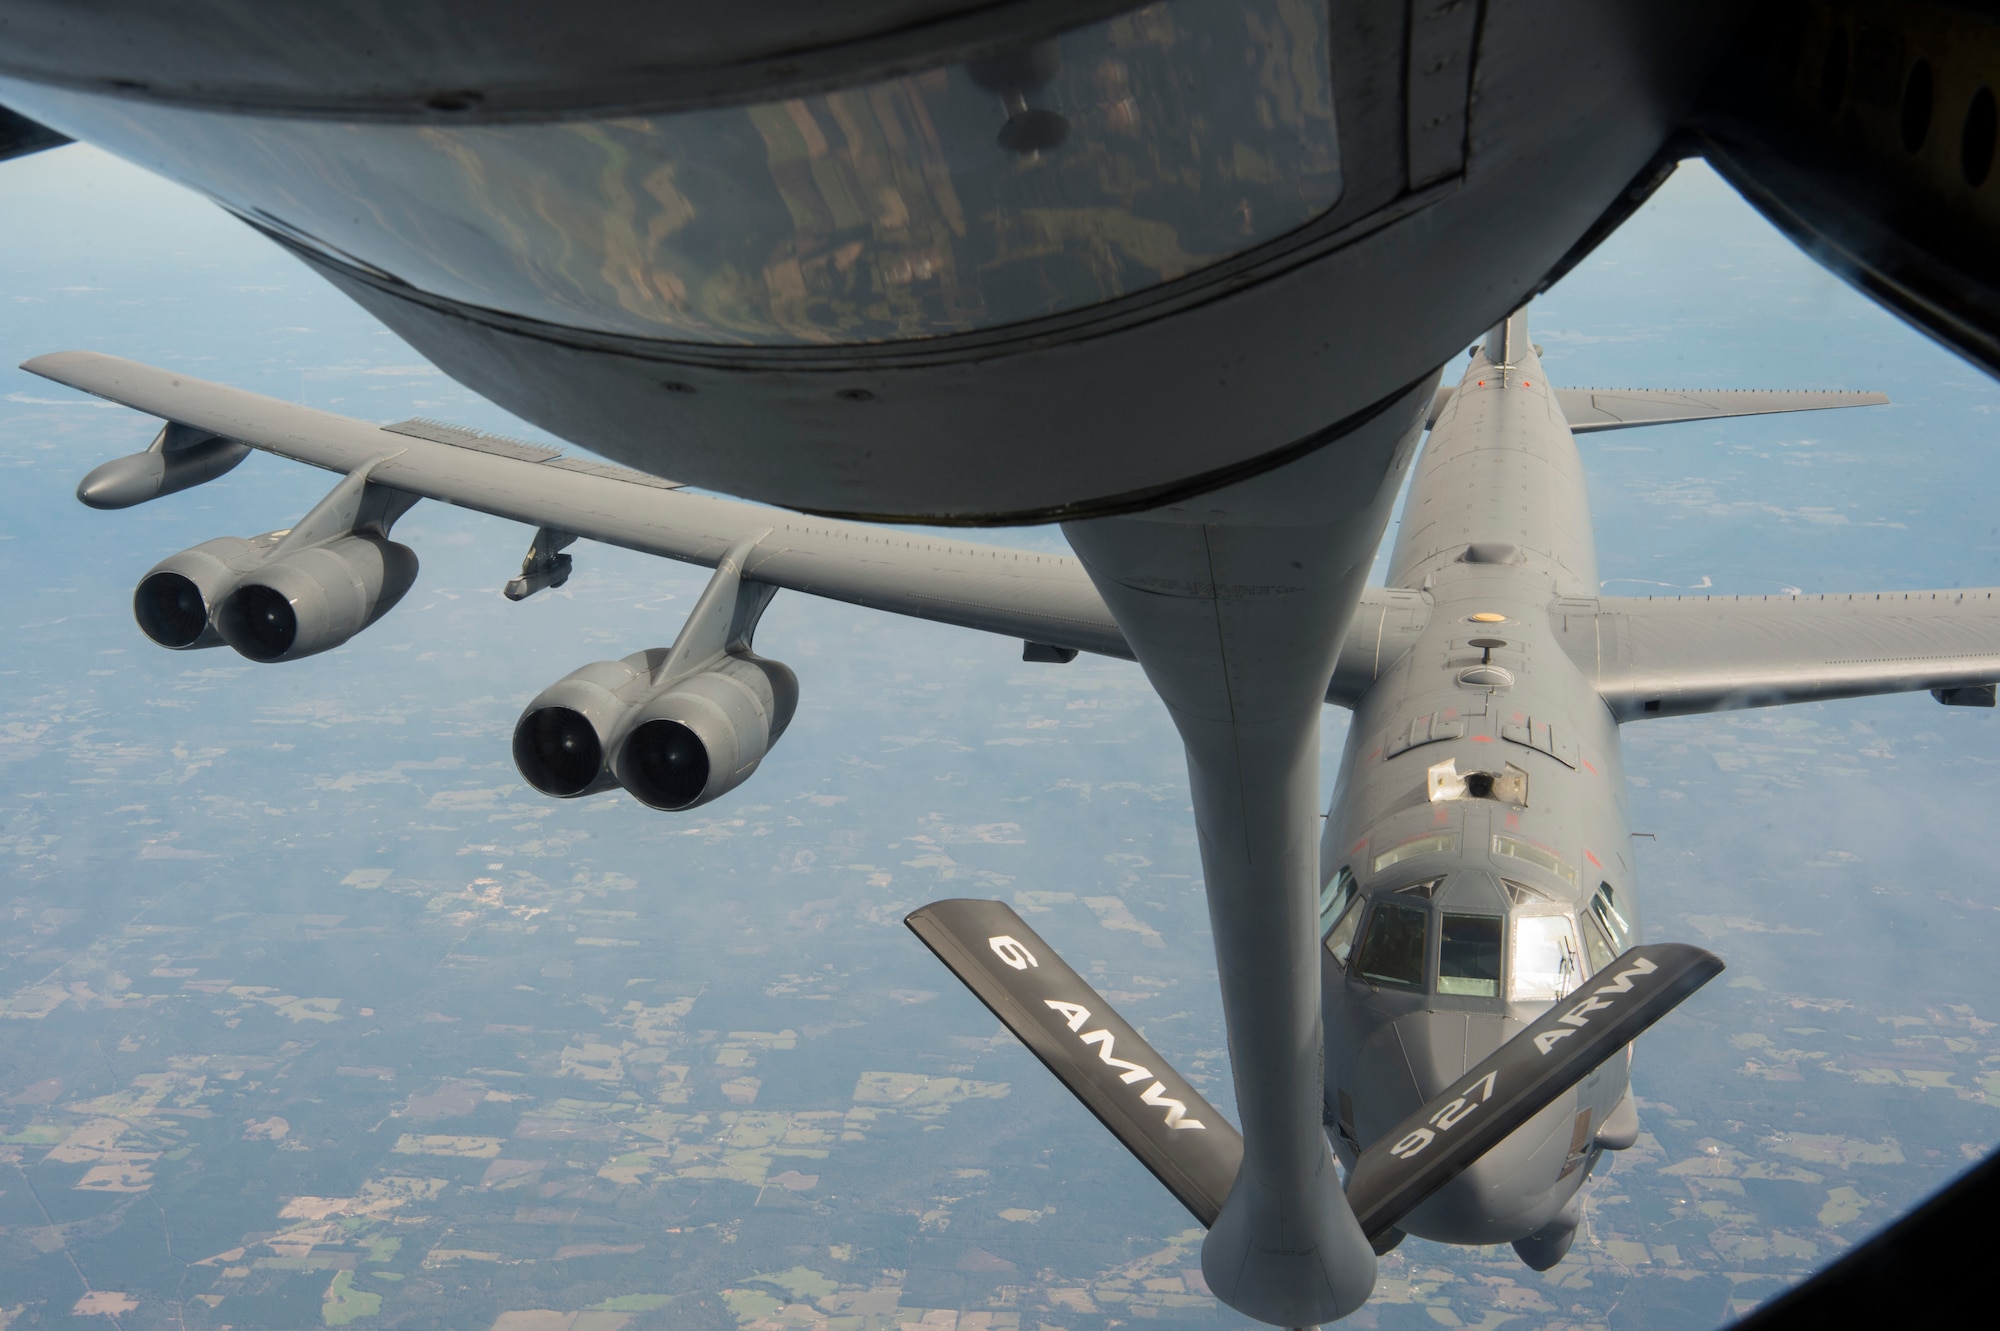 A B-52 Stratofortress assigned to Barksdale Air Force Base, La., approaches a KC-135 Stratotanker assigned to MacDill AFB, Fla., for refueling support Nov. 4, 2019.  The KC-135 delivers rapid global mobility with air refueling to extend the capabilities for global strike and strategic deterrence missions.